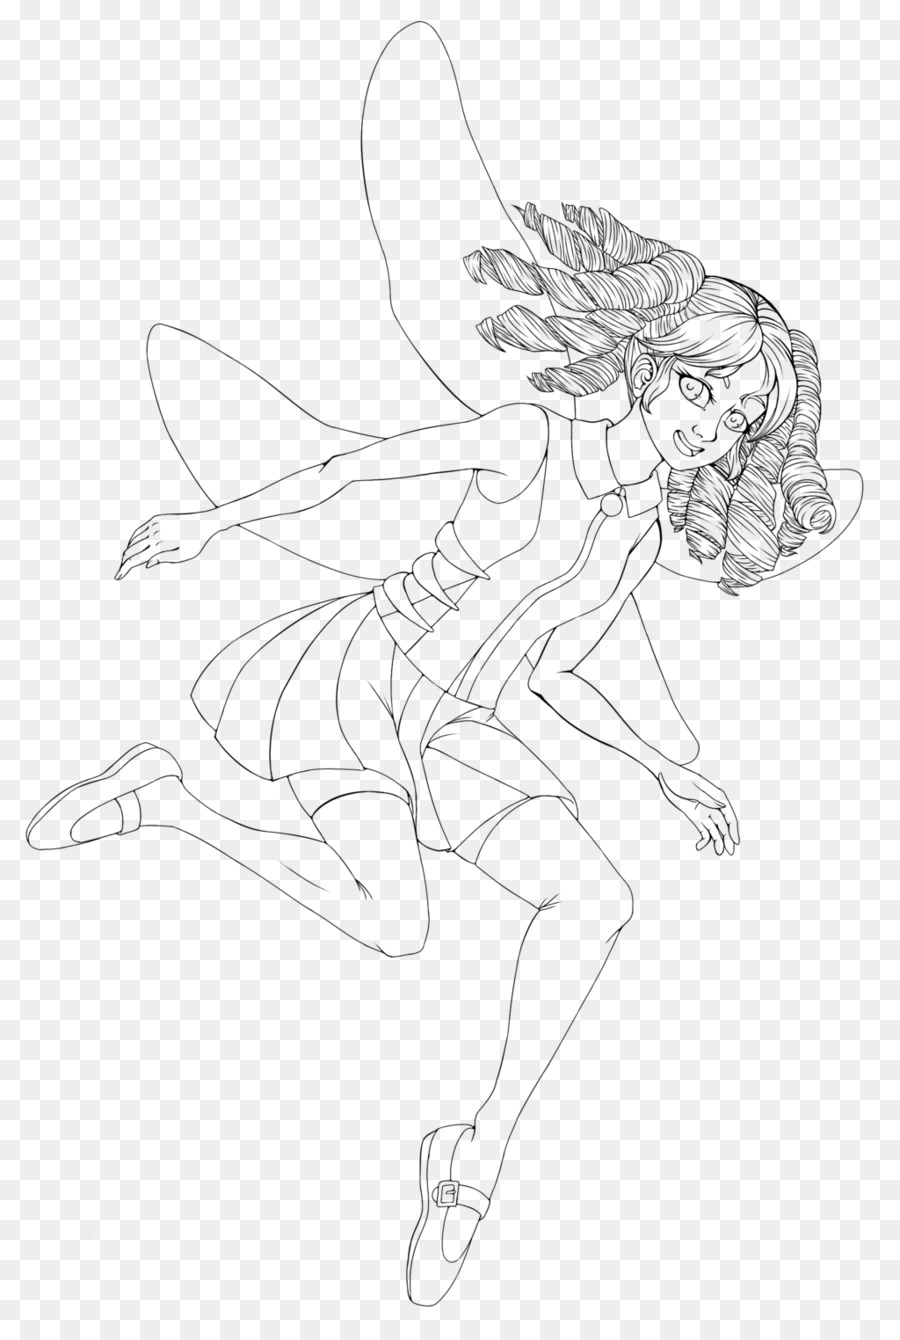 Fairy Drawing Line art Sketch - Fairy png download - 1024*1507 - Free Transparent Fairy png Download.